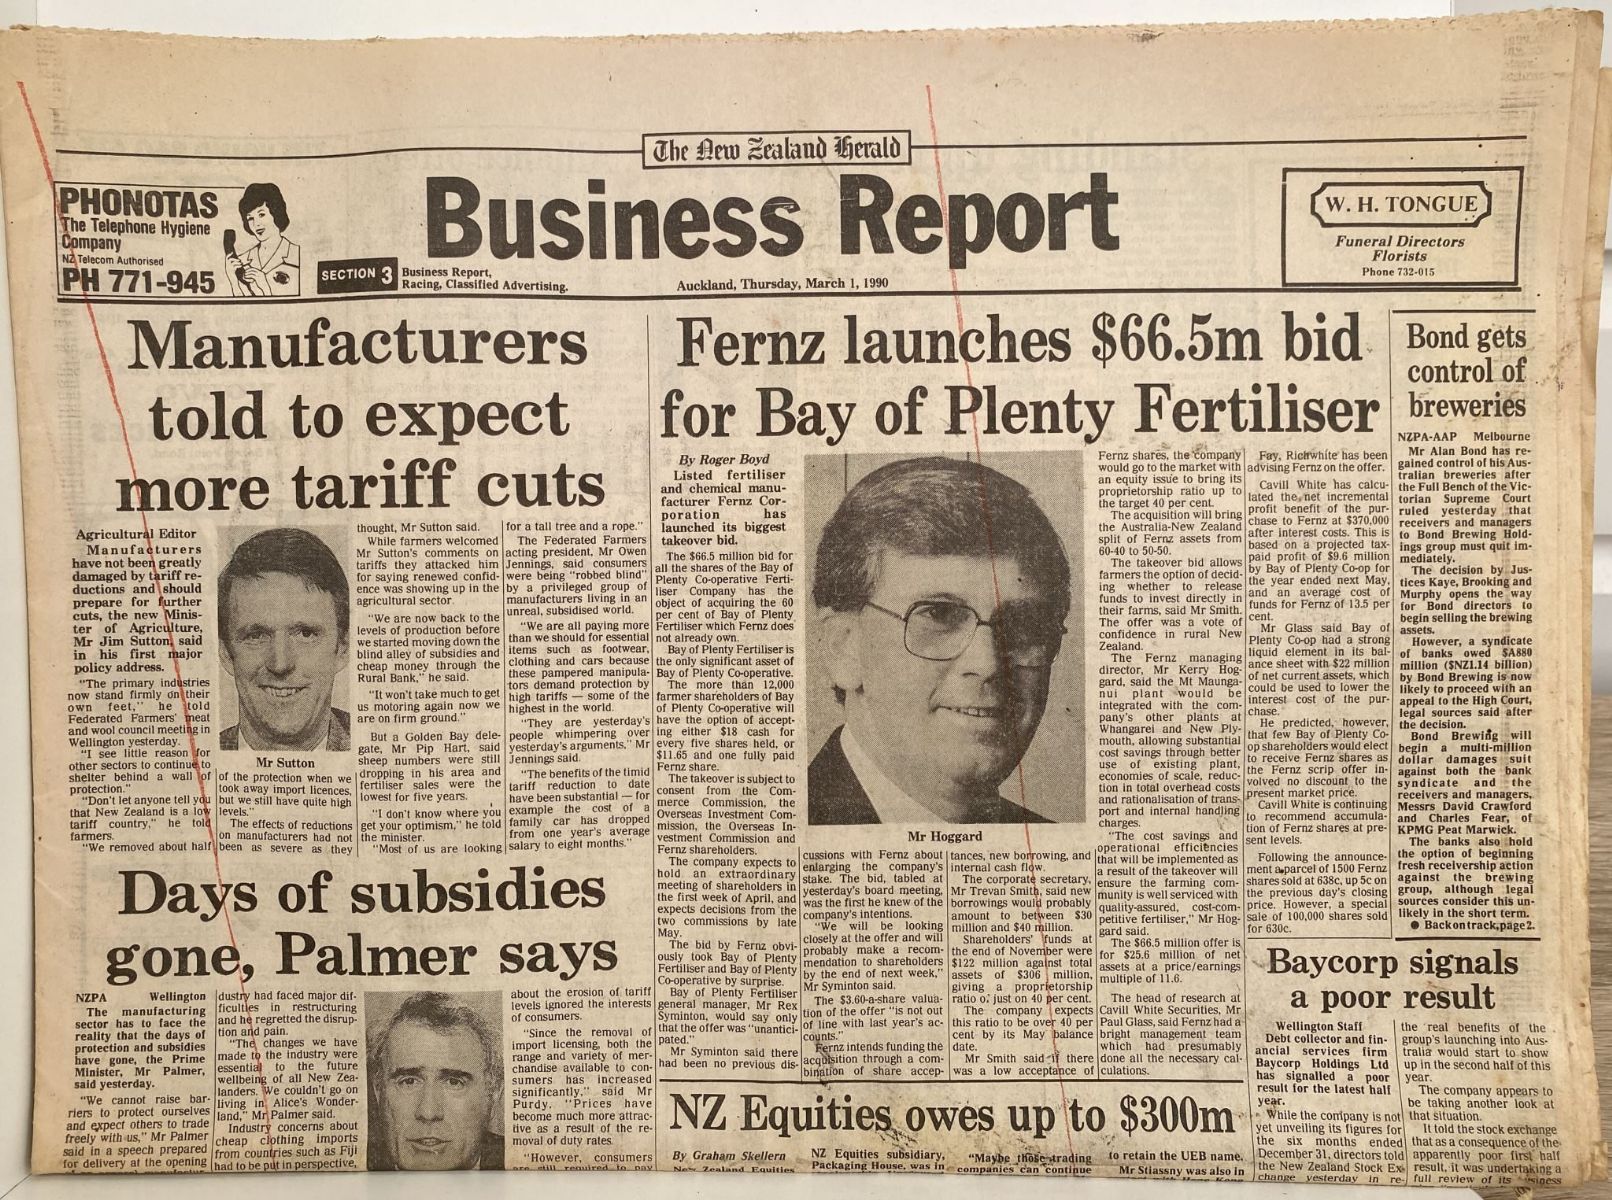 OLD NEWSPAPER: The New Zealand Herald - 1st March 1990